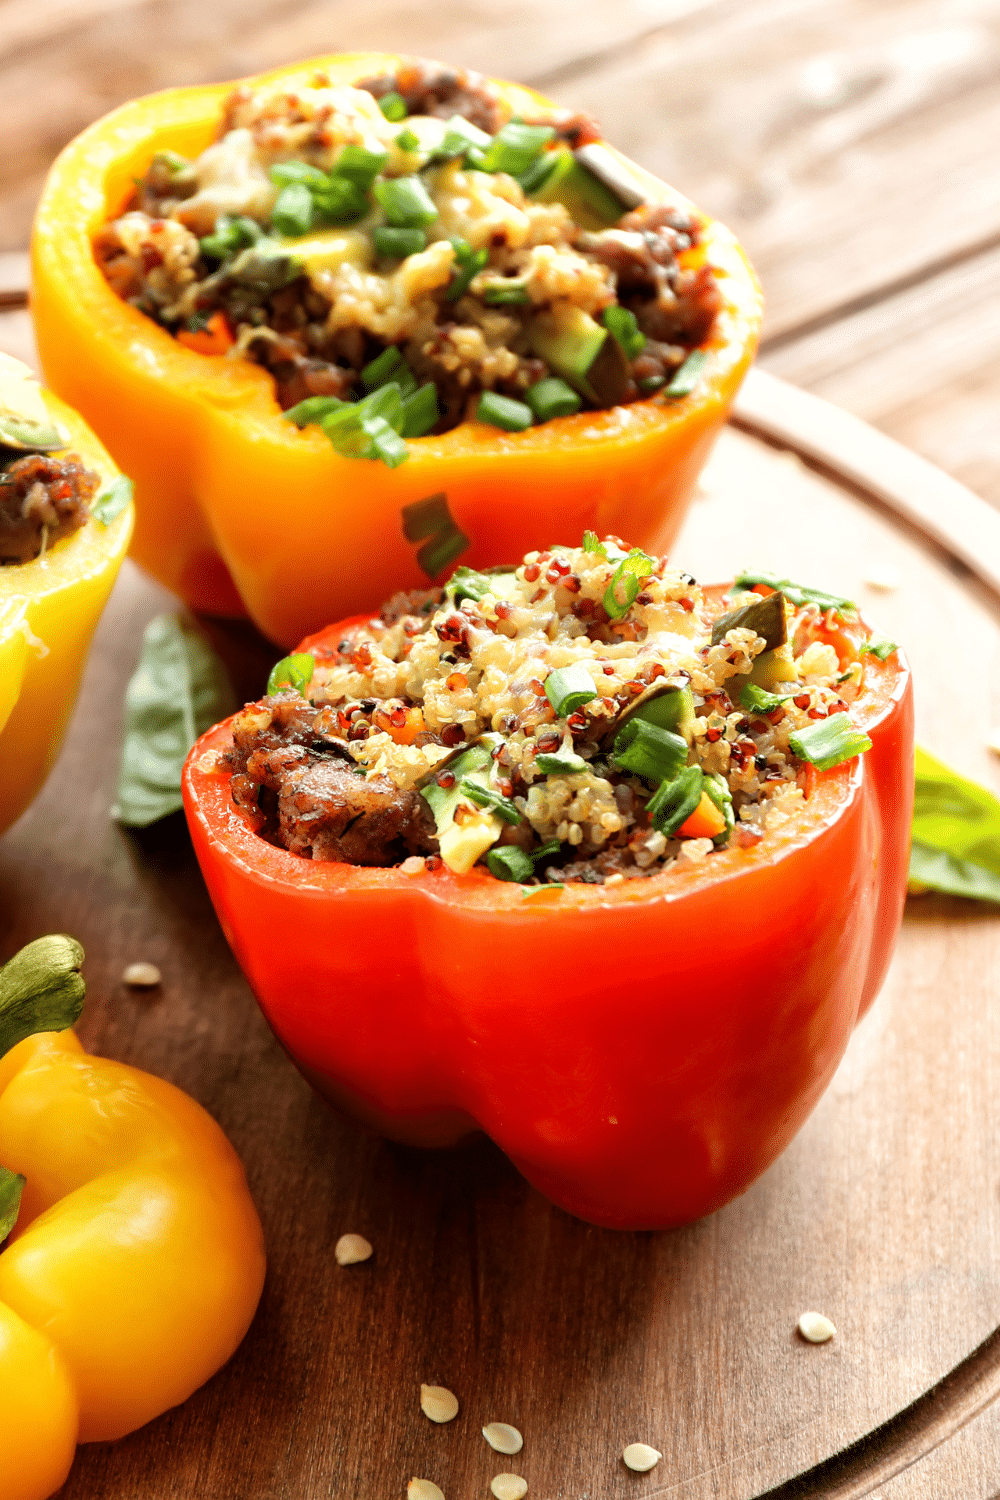 A tantalizing image of stuffed peppers filled with savory spiced quinoa. The vibrant red and green bell peppers are beautifully arranged on a plate, showcasing the colorful presentation of this delicious dish. The quinoa is perfectly seasoned, offering a flavorful and wholesome filling. This appetizing meal is both visually appealing and packed with nutritious ingredients.